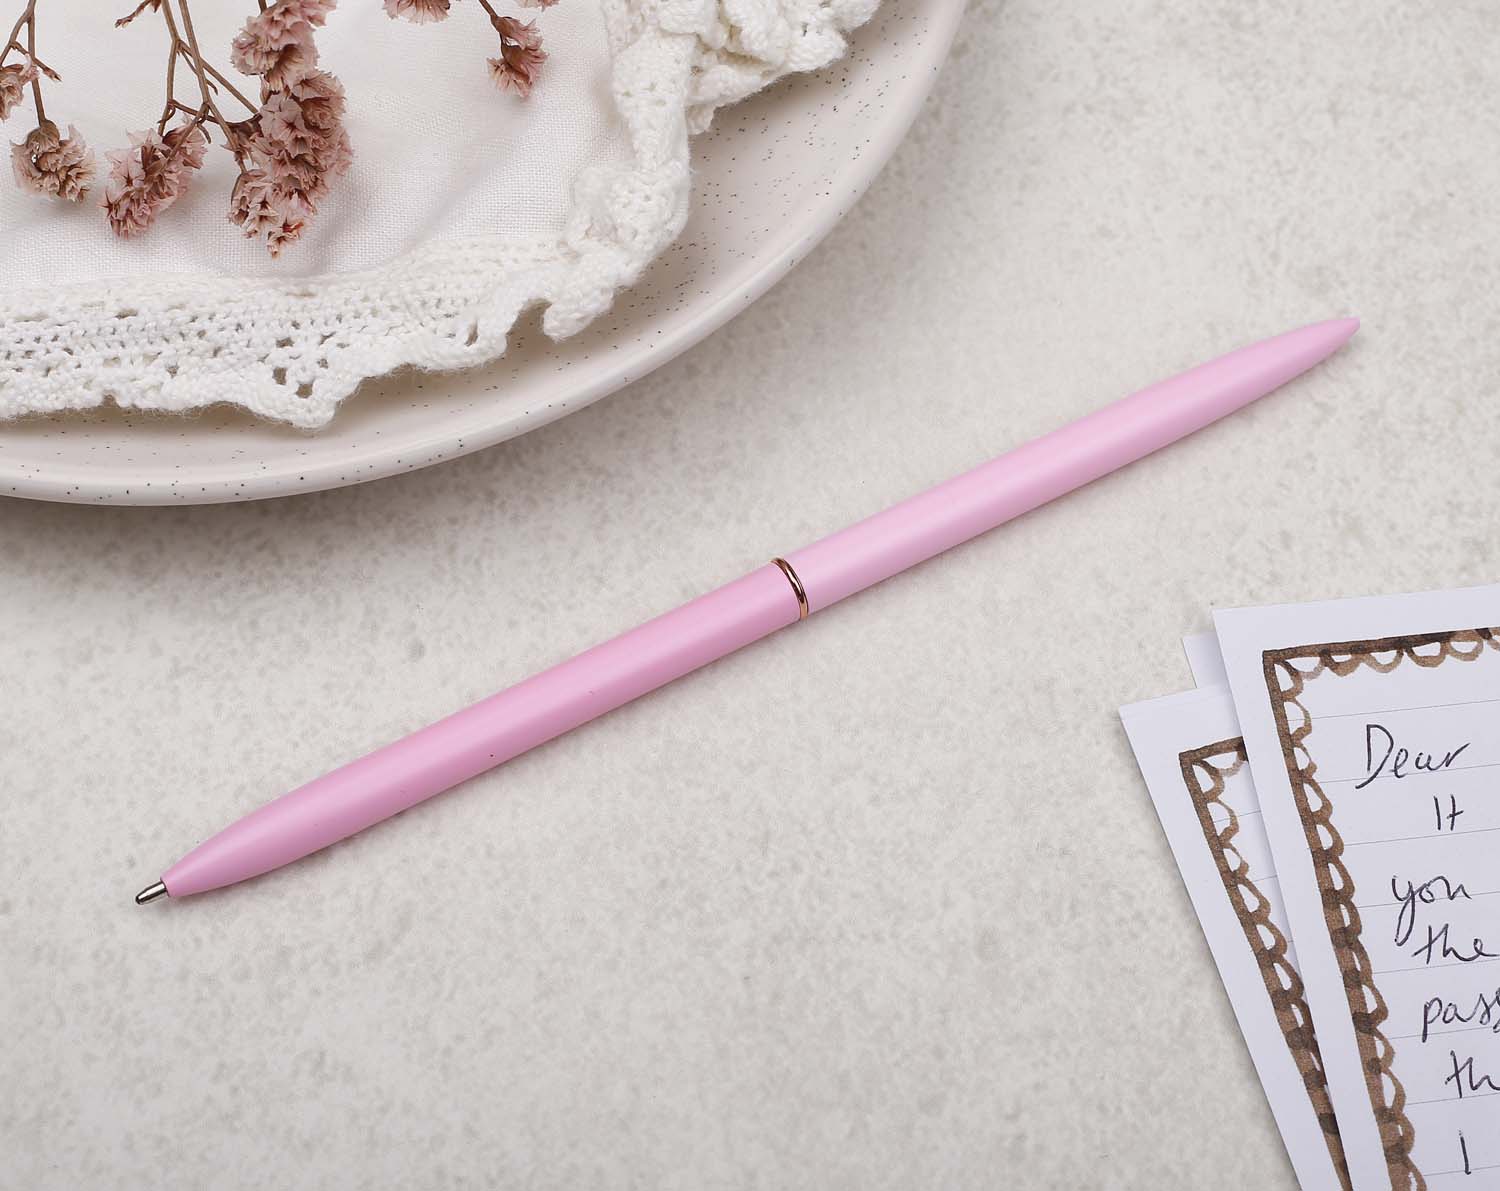 Slim pink metal pen with ballpoint tip and rose gold detail.